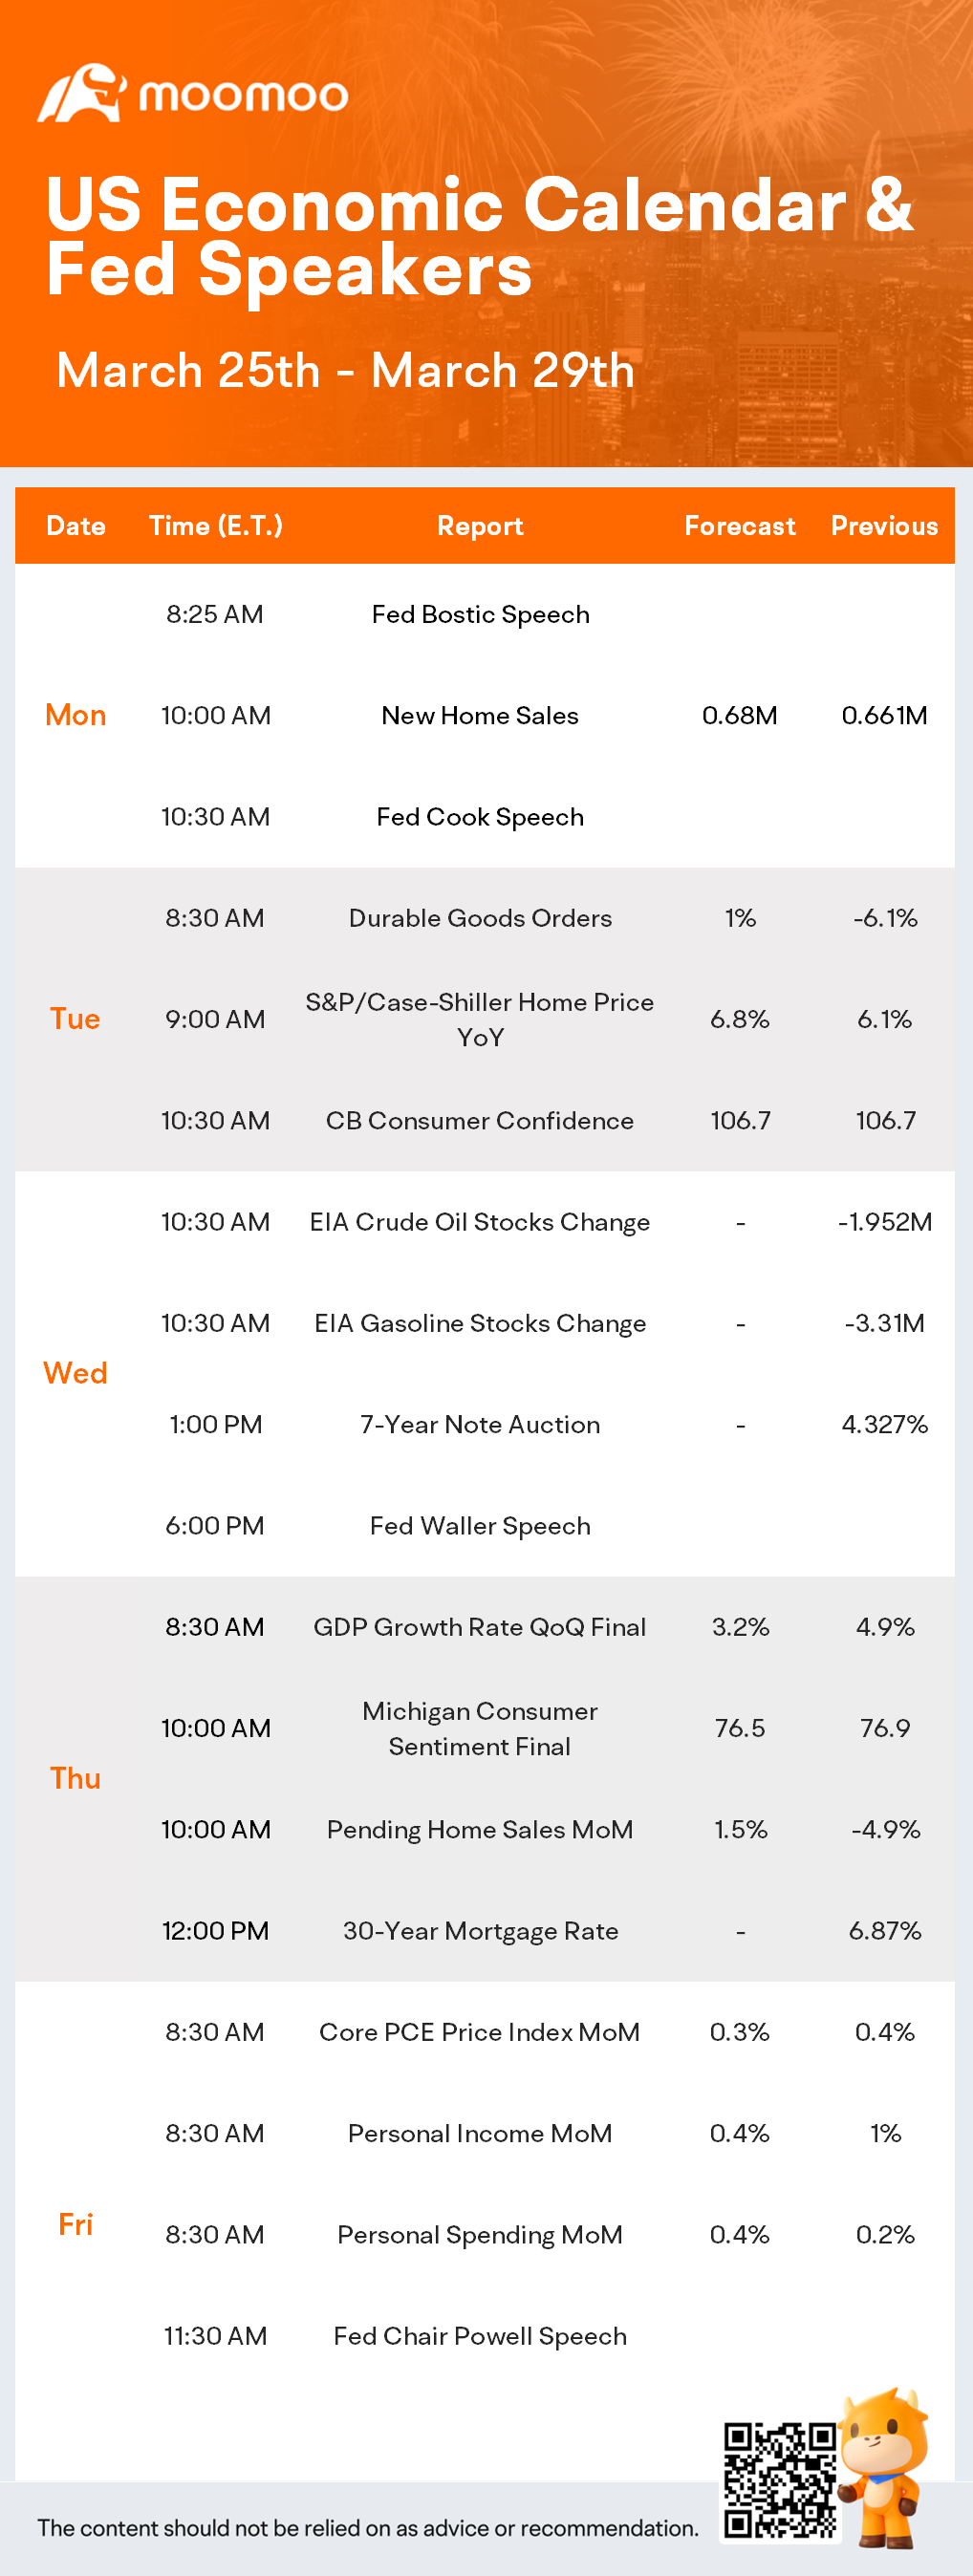 What to Expect in the Week Ahead (GME and JEF Earnings; PCE, Personal Income and Personal Spending Data)